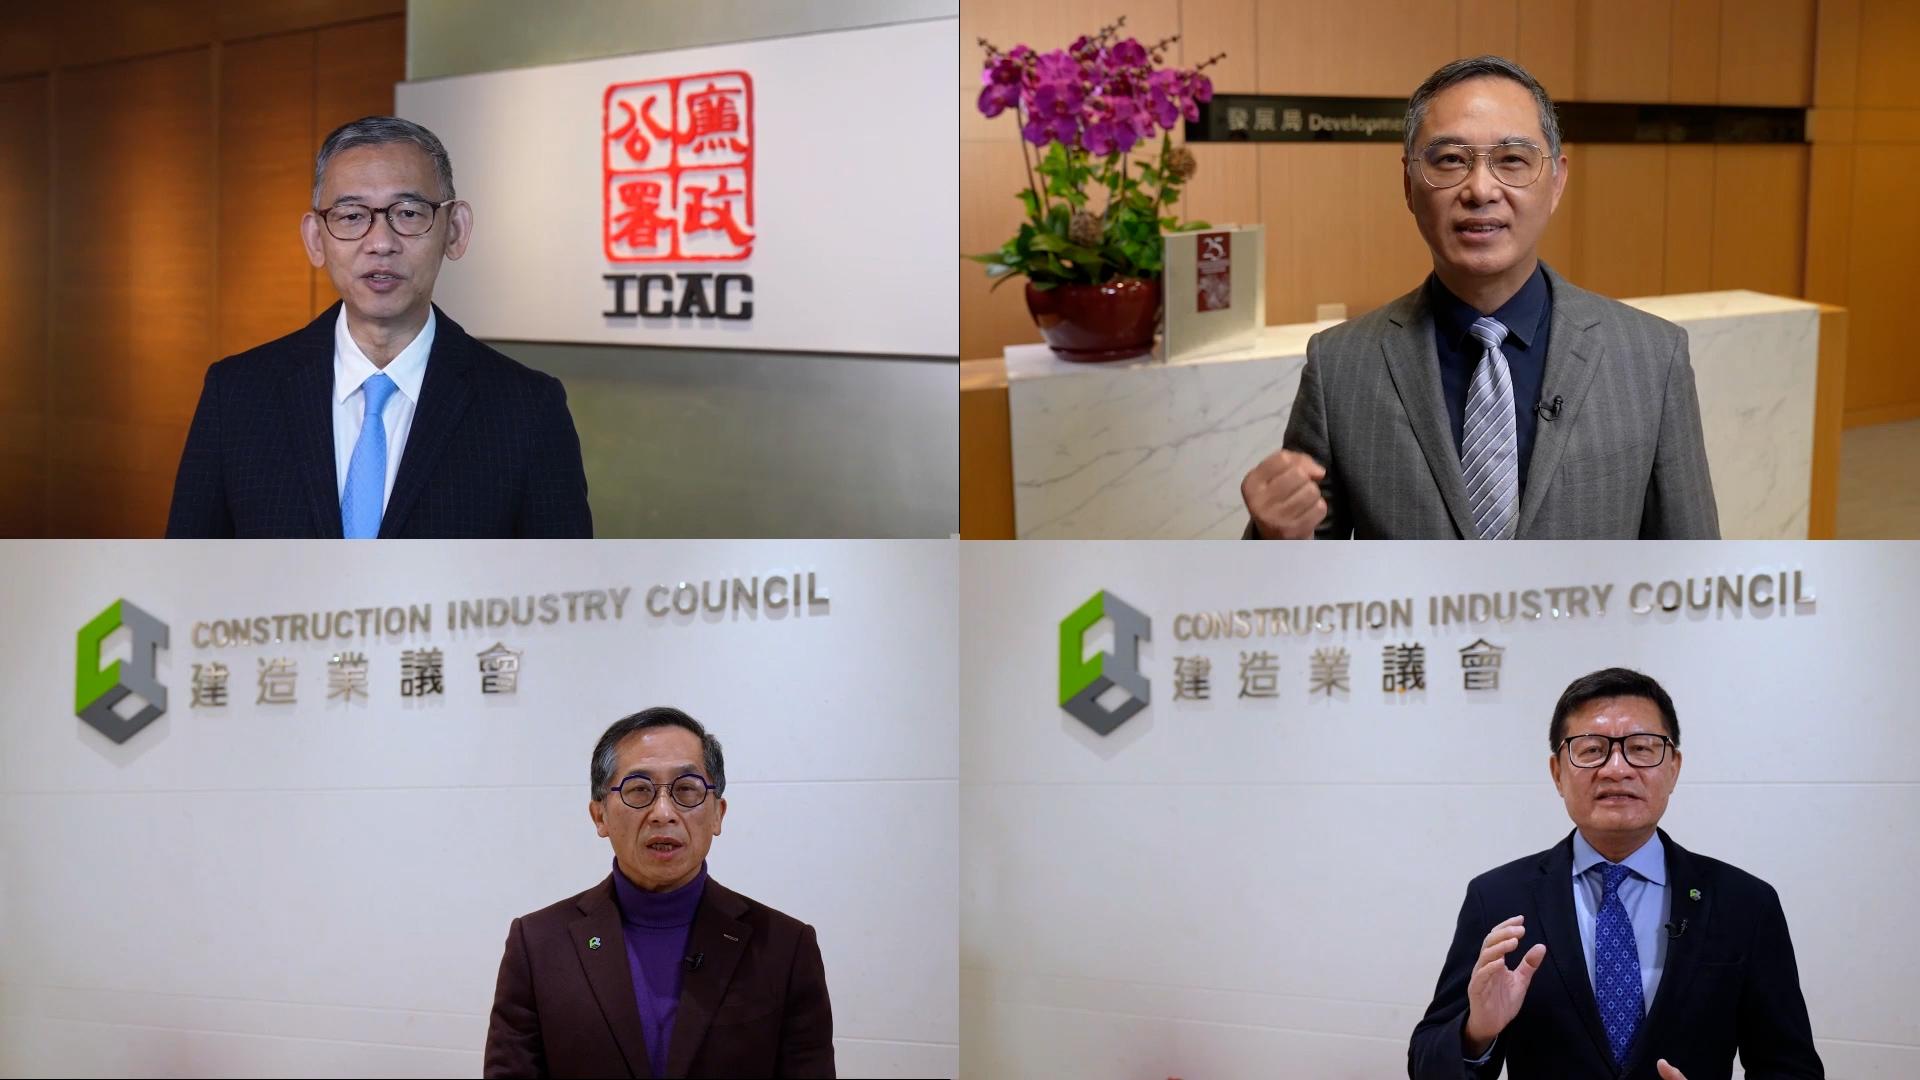 In a video launched today (December 23), the Permanent Secretary for Development (Works), Mr Ricky Lau (top right); the ICAC Commissioner, Mr Woo Ying-ming (top left); the Chairman of the Construction Industry Council (CIC), Mr Thomas Ho (bottom left); and the Executive Director of the CIC, Mr Albert Cheng (bottom right), encourage the construction industry to sign the Construction Industry Integrity Charter 2.0 to promote a management culture of integrity in the construction industry.